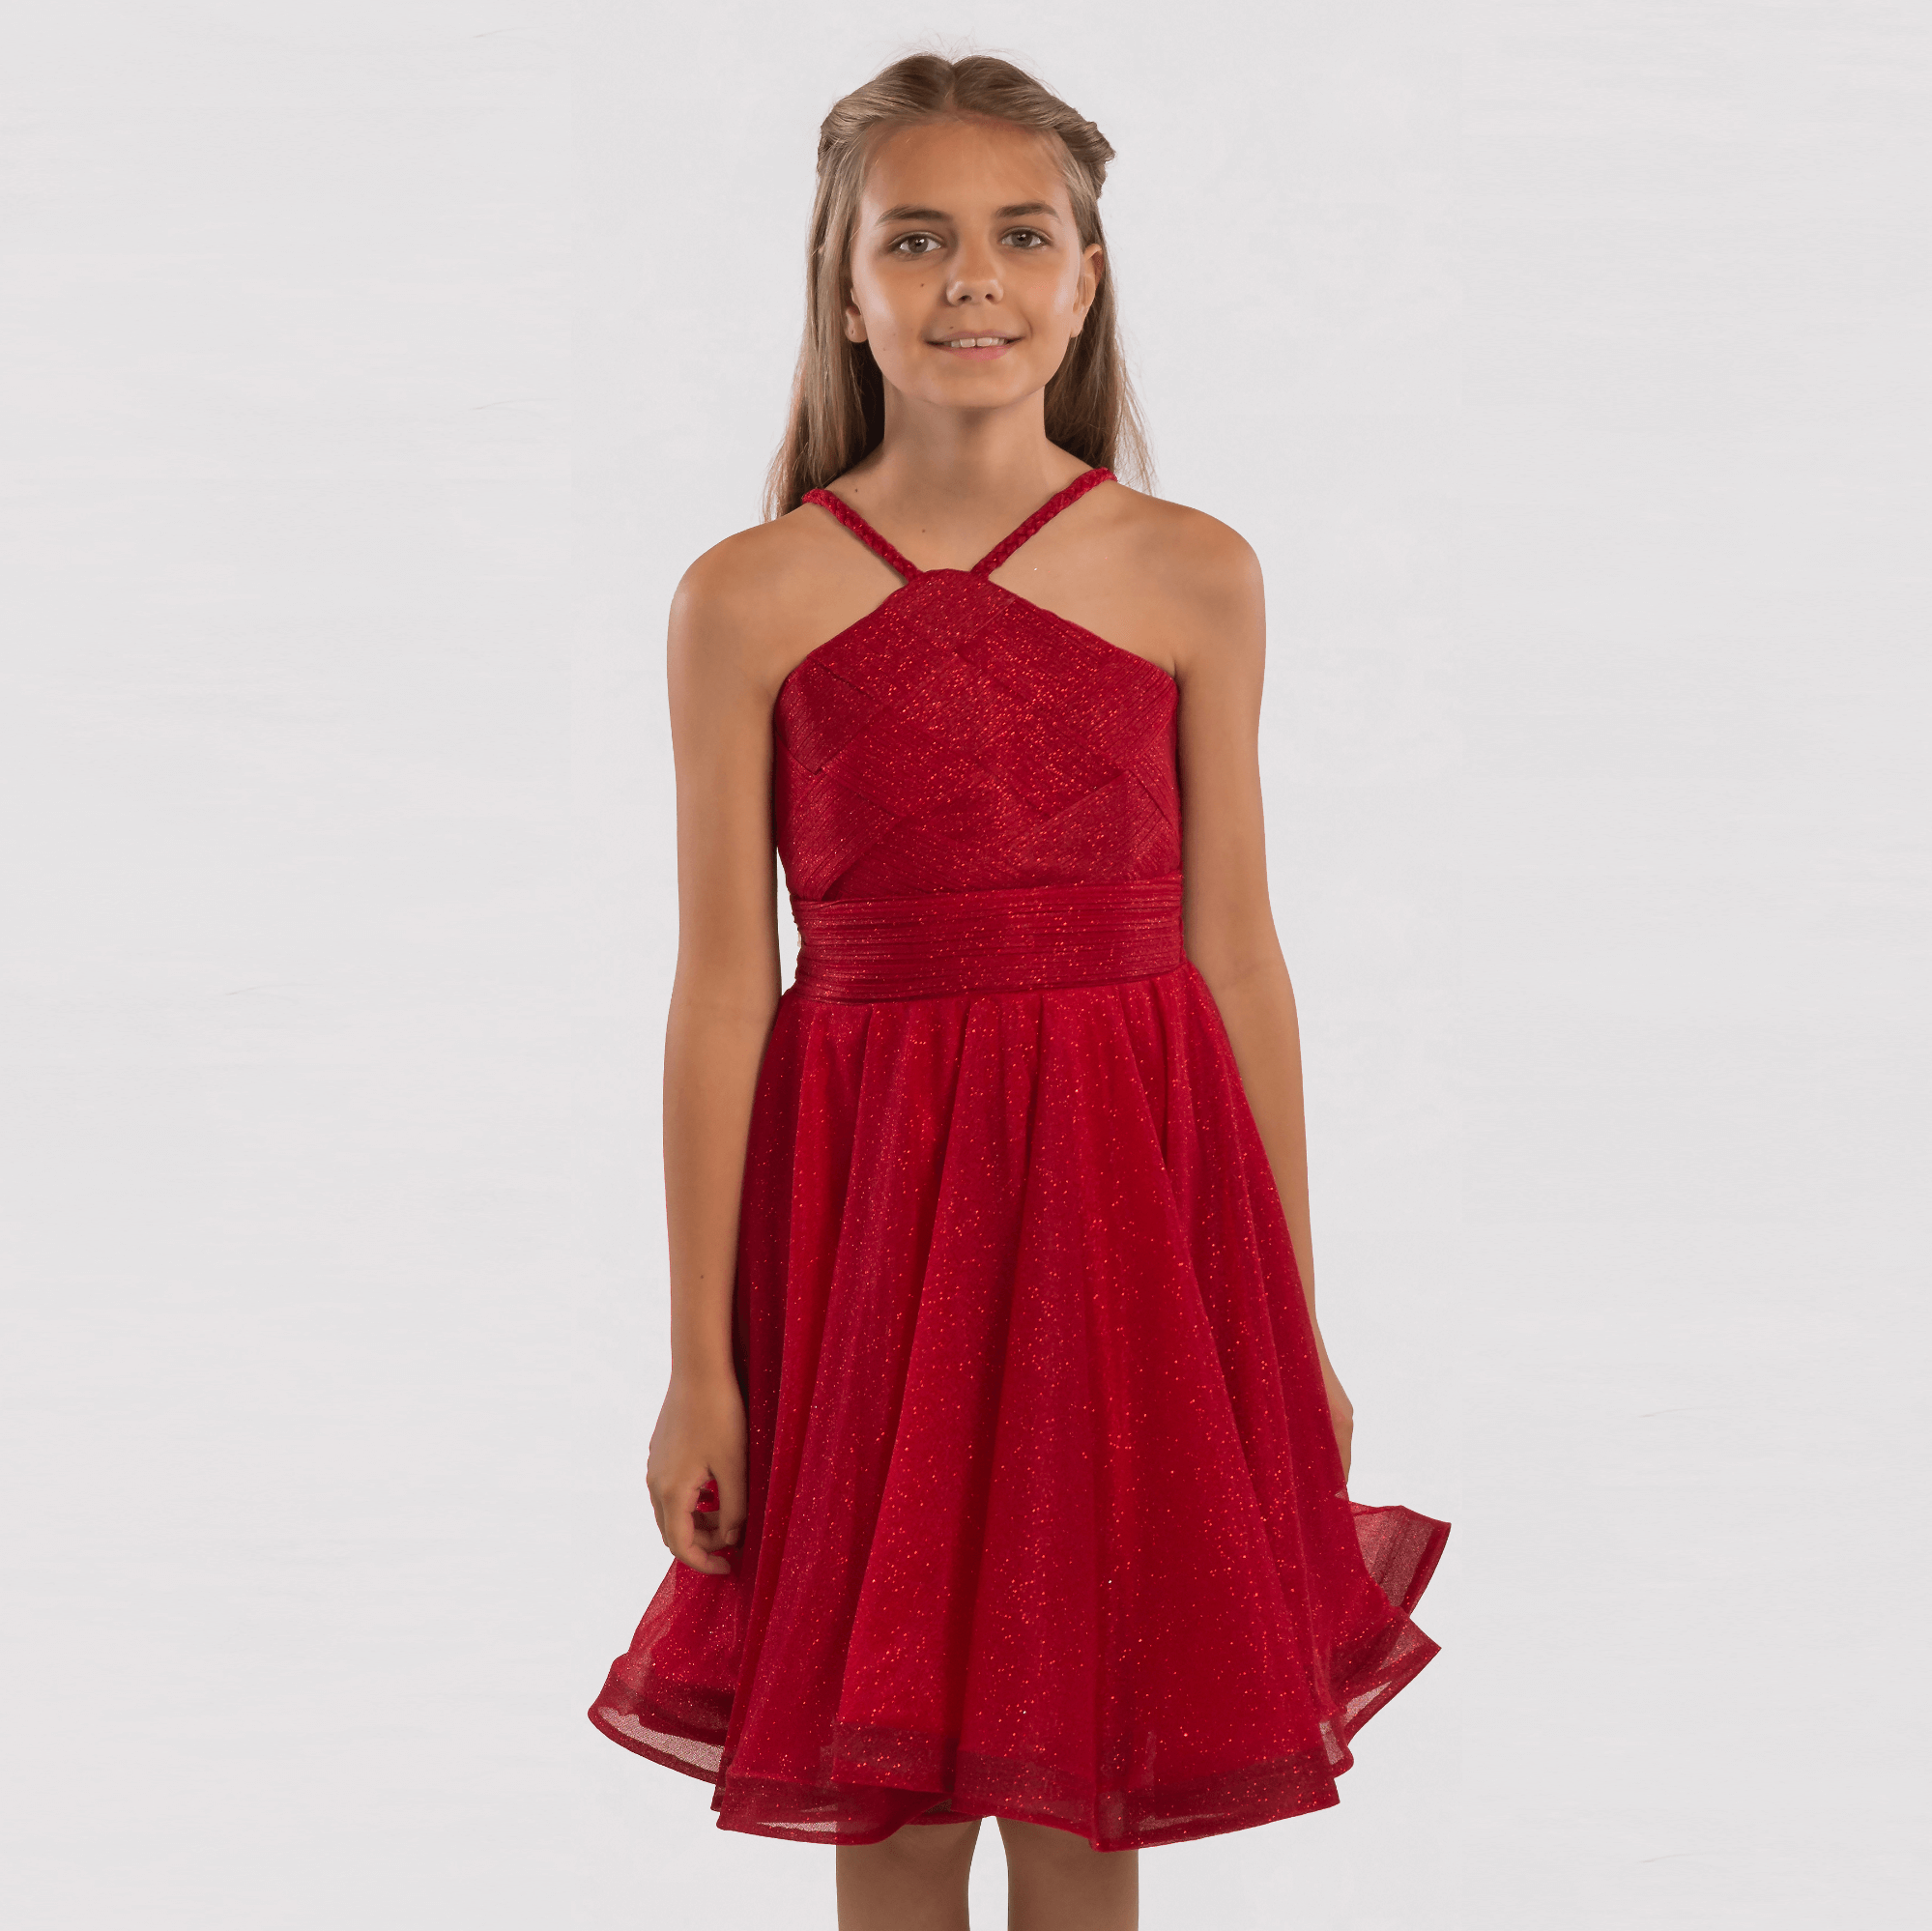 Lily's Gown Girls Formal Dress